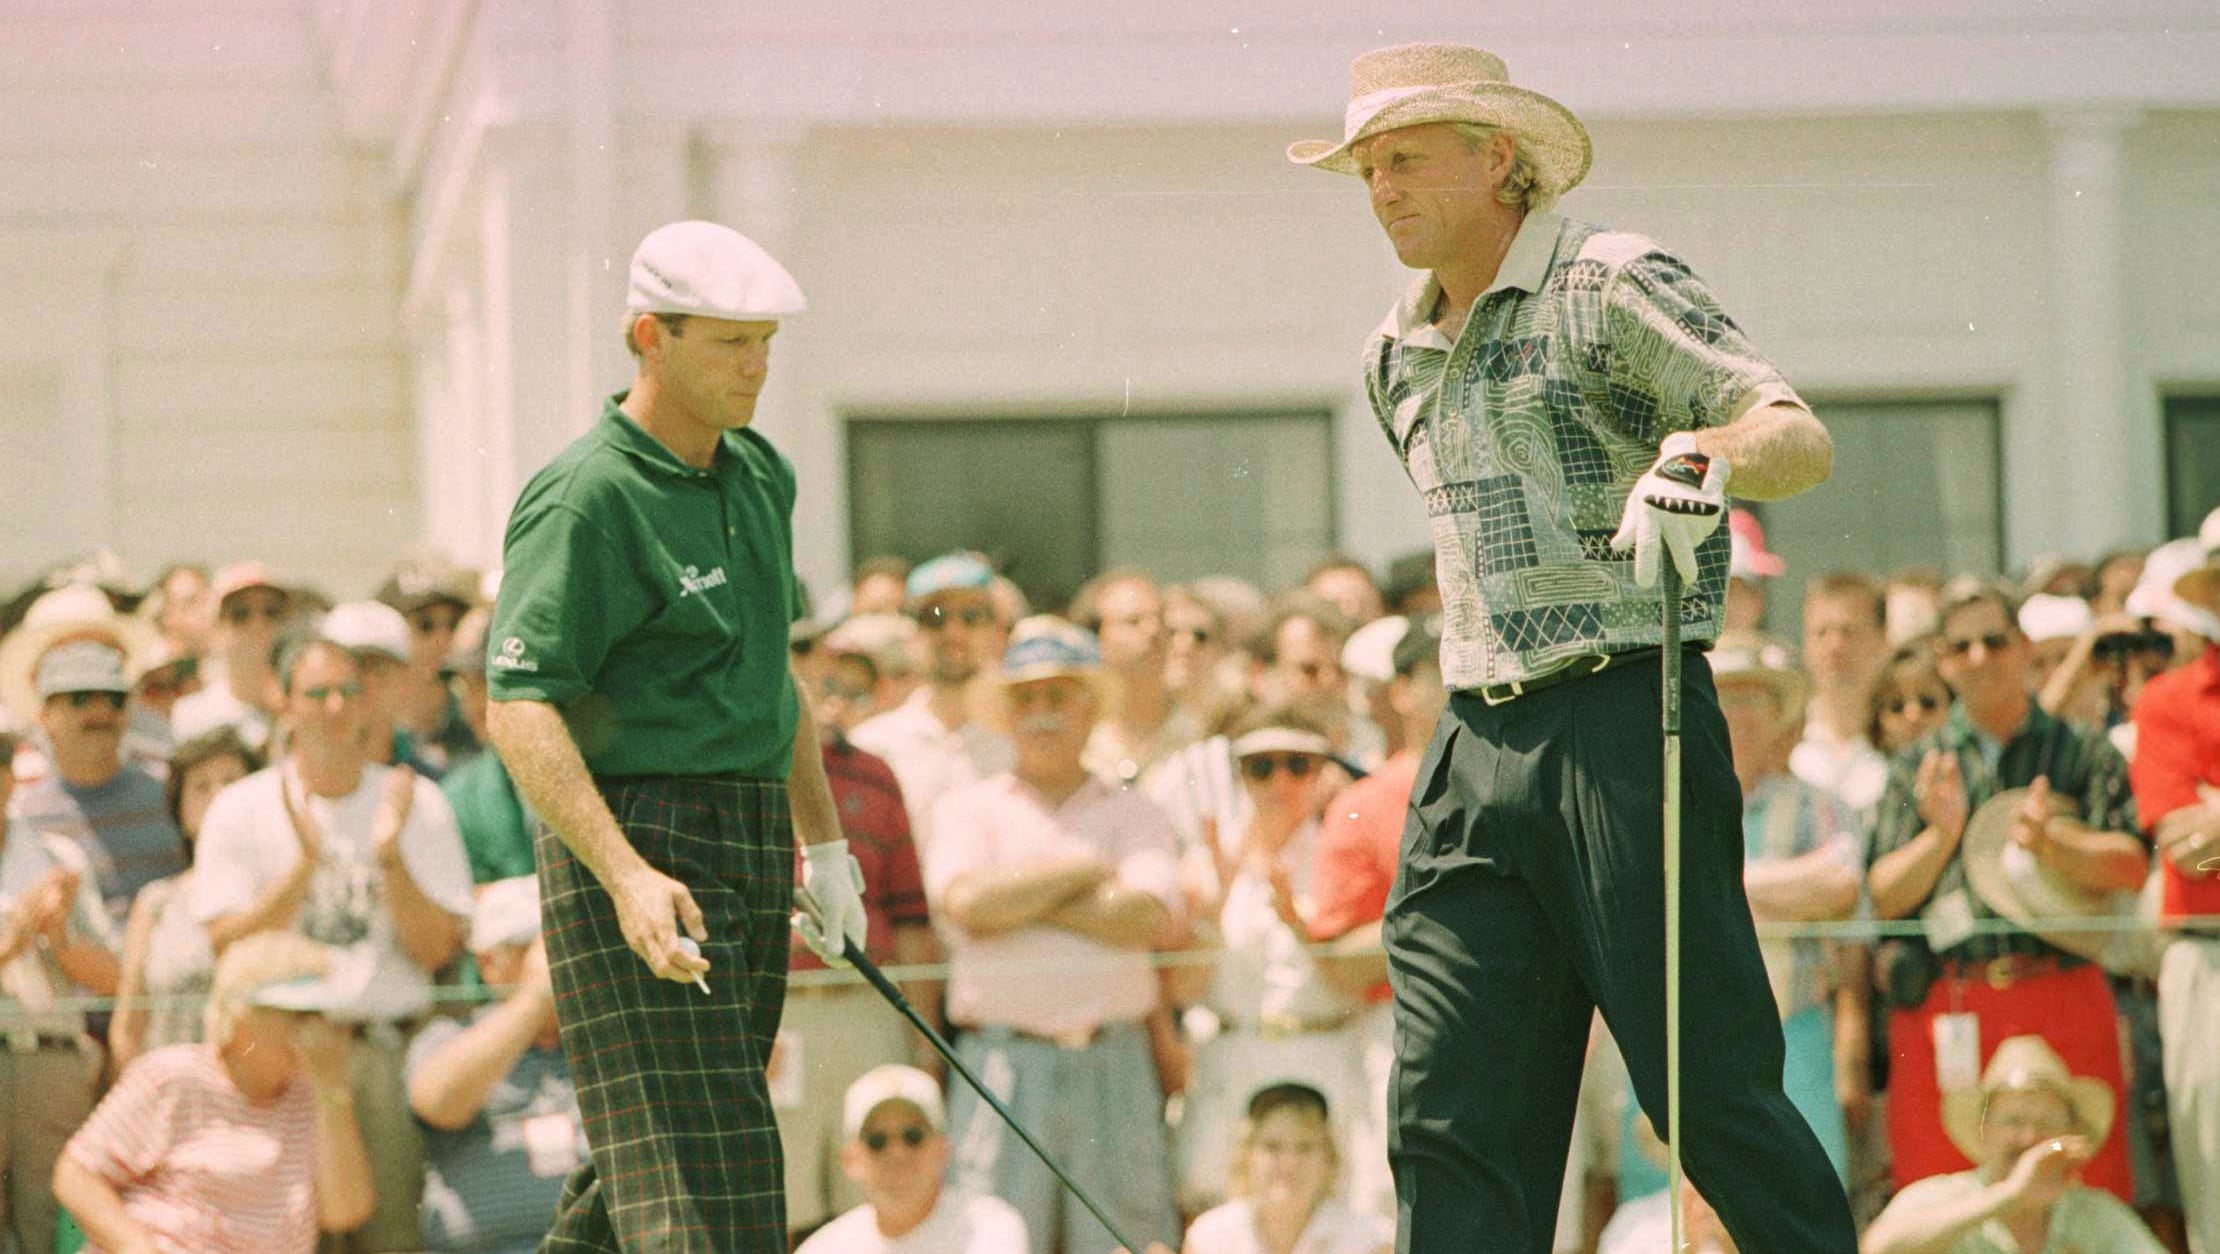 Payne Stewart takes the tee after Greg Norman during the third round of the 1996 U.S. Open at Oakland Hills.